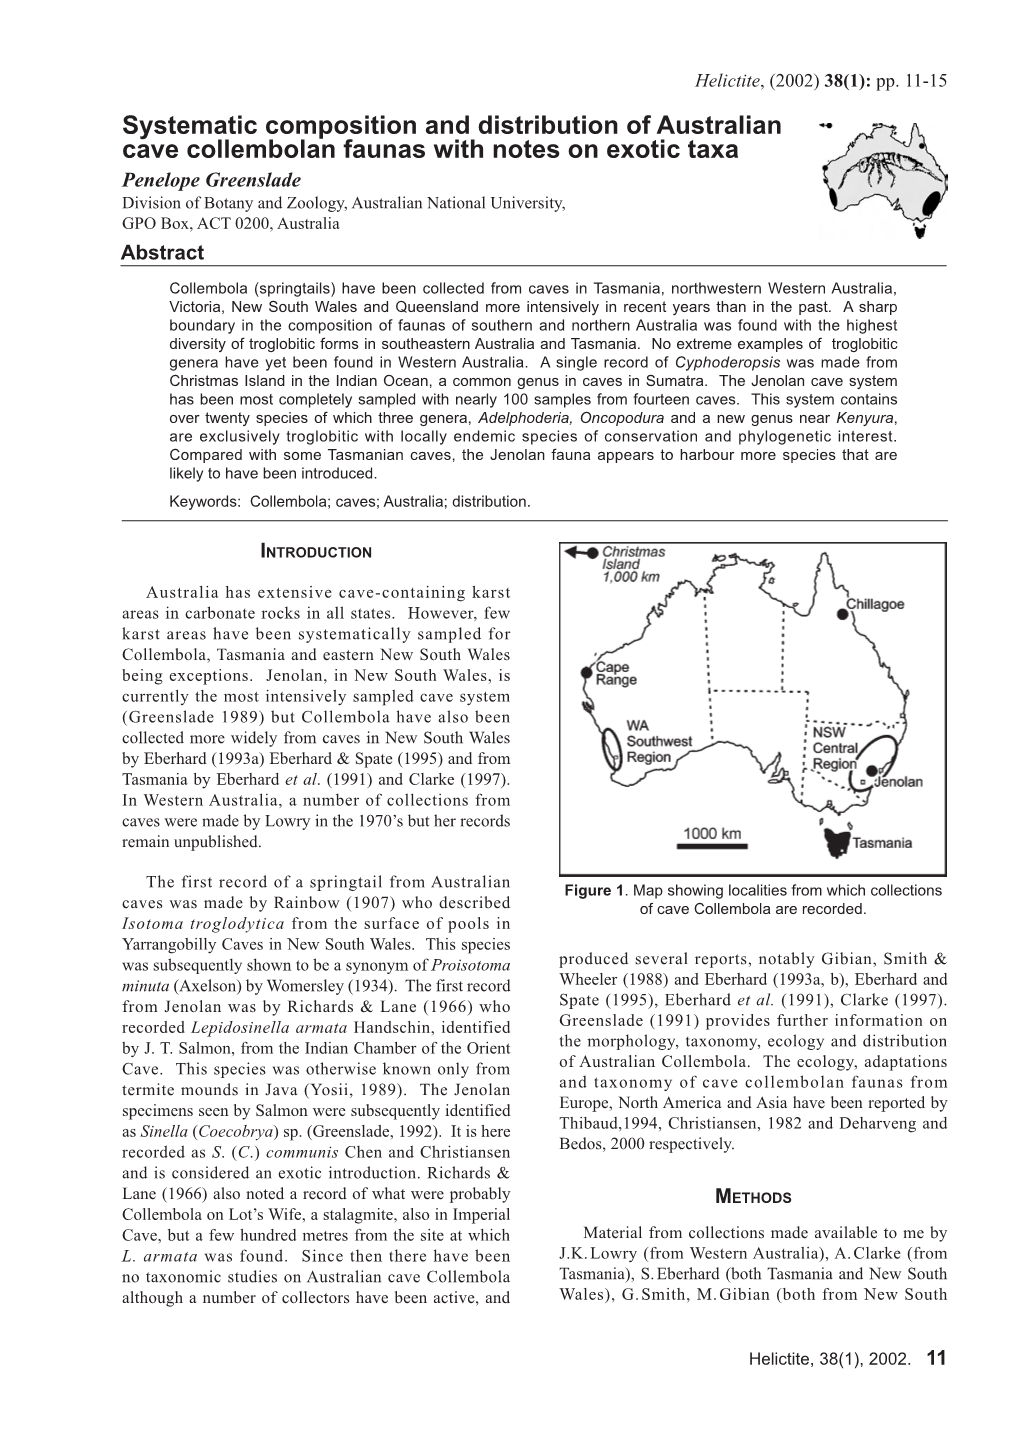 Systematic Composition and Distribution of Australian Cave